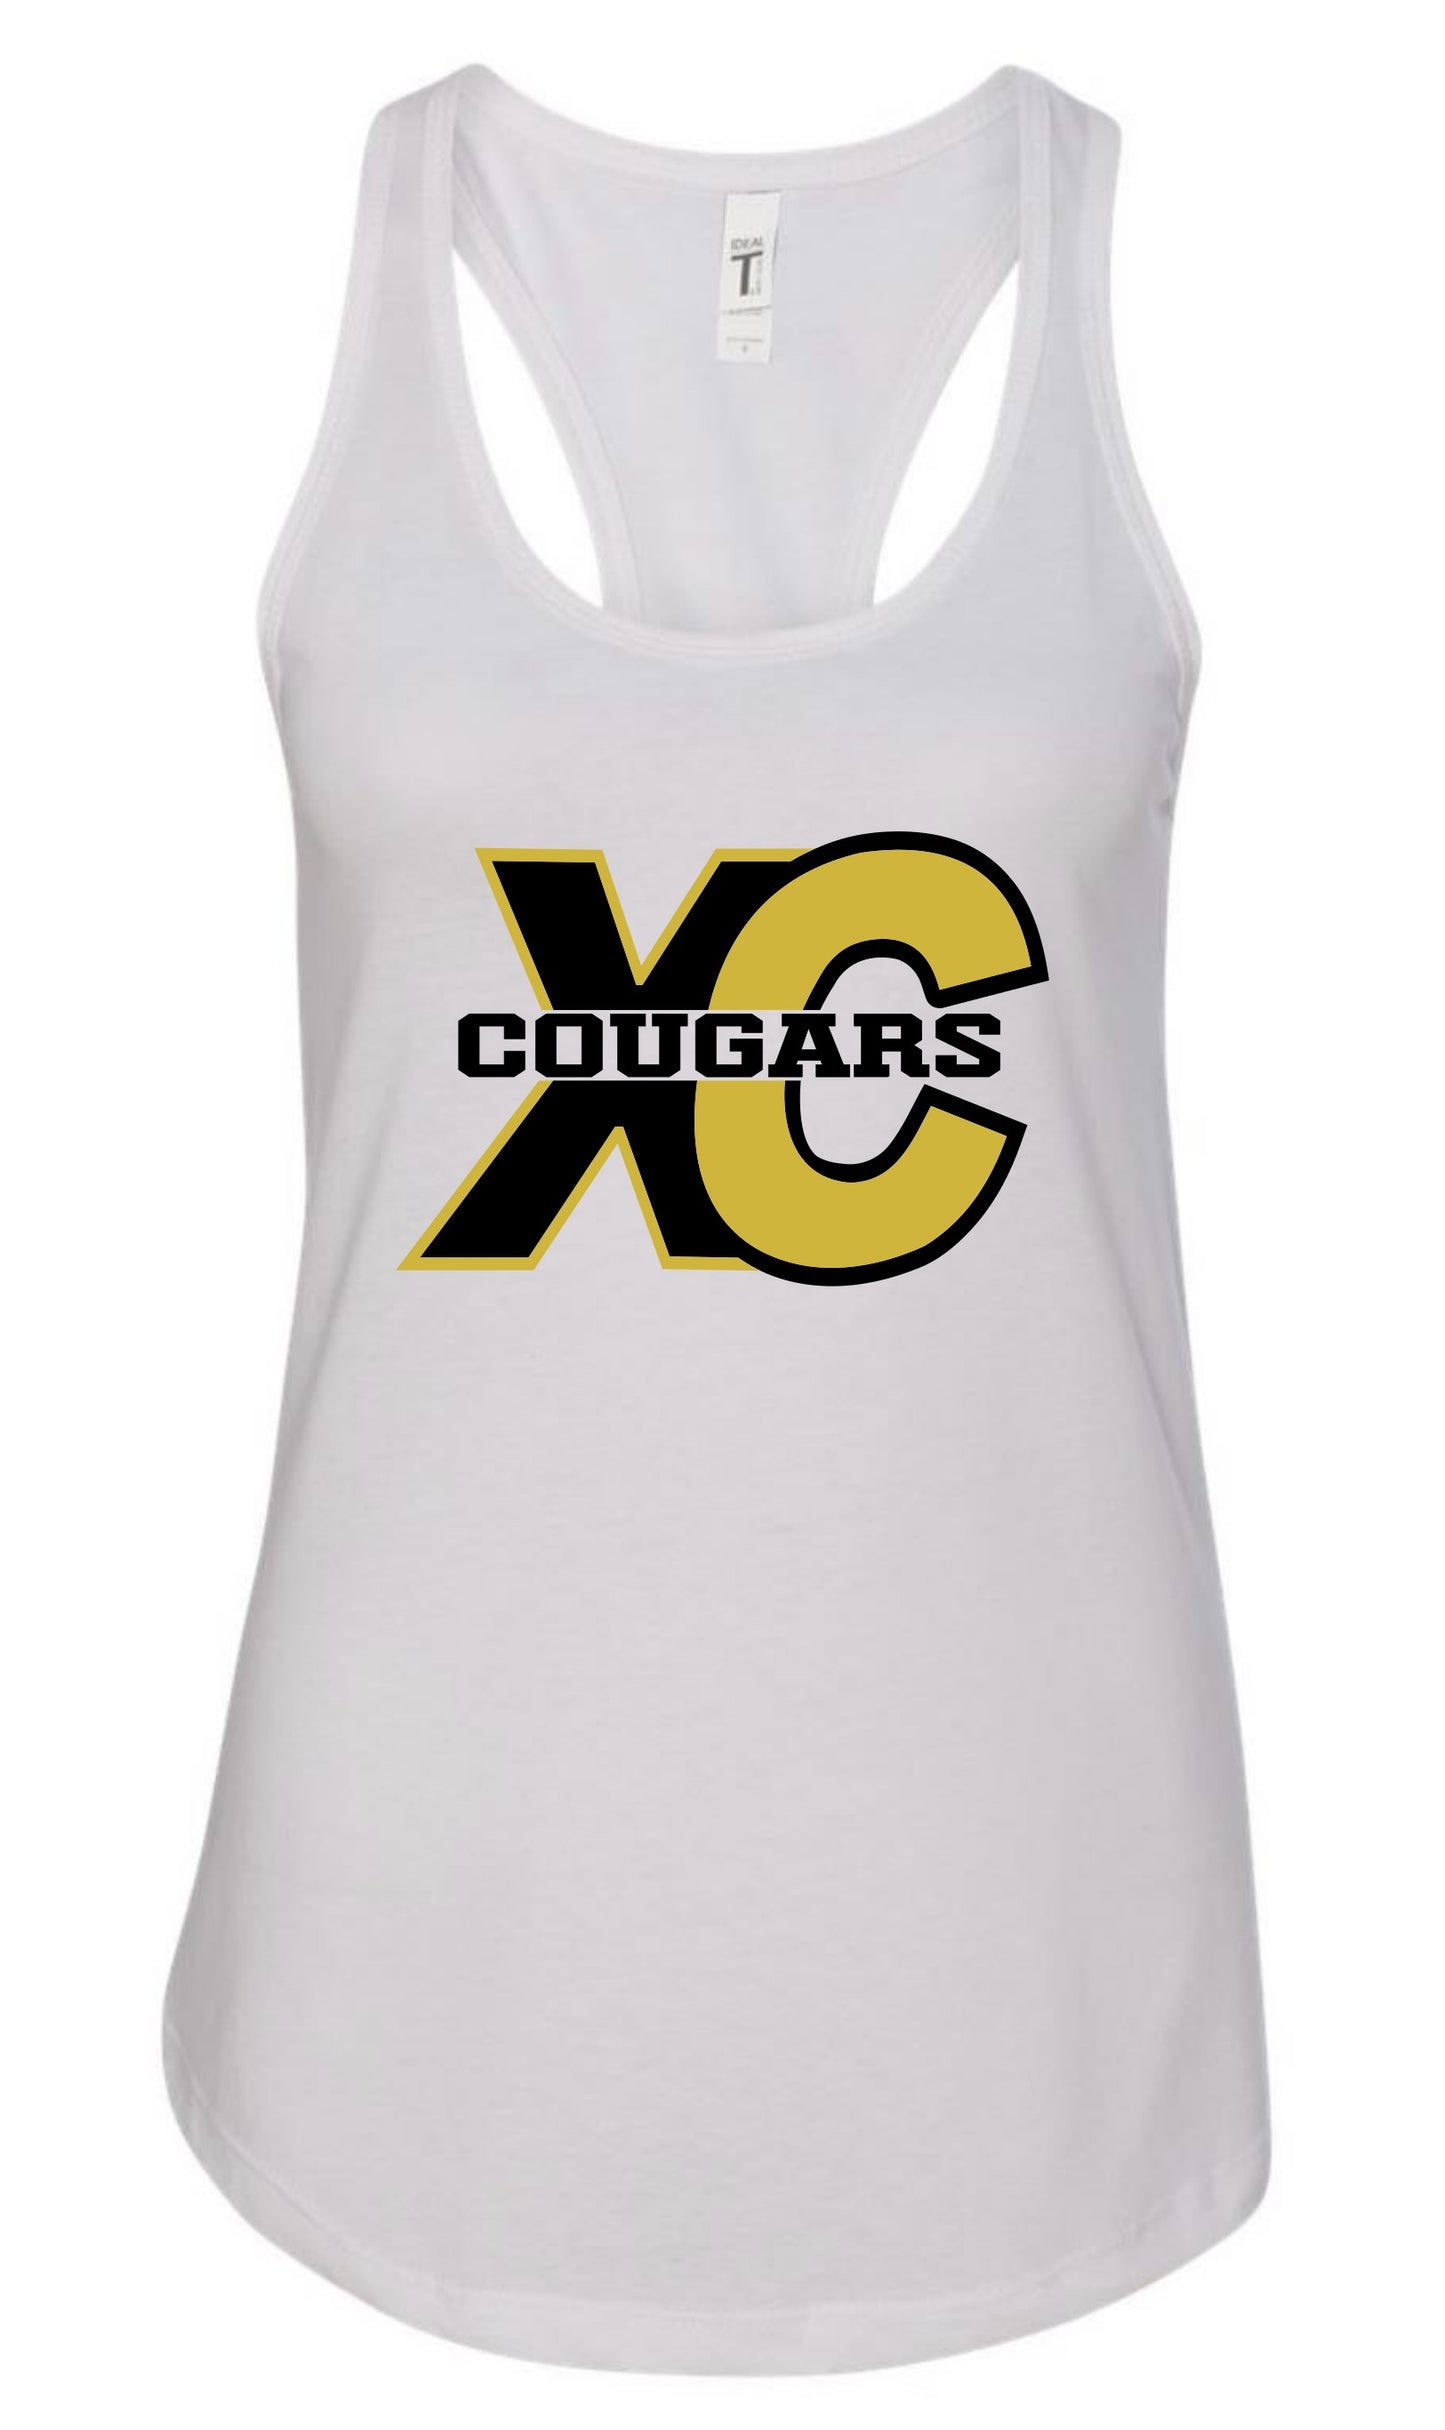 Cougars XC Tank Top